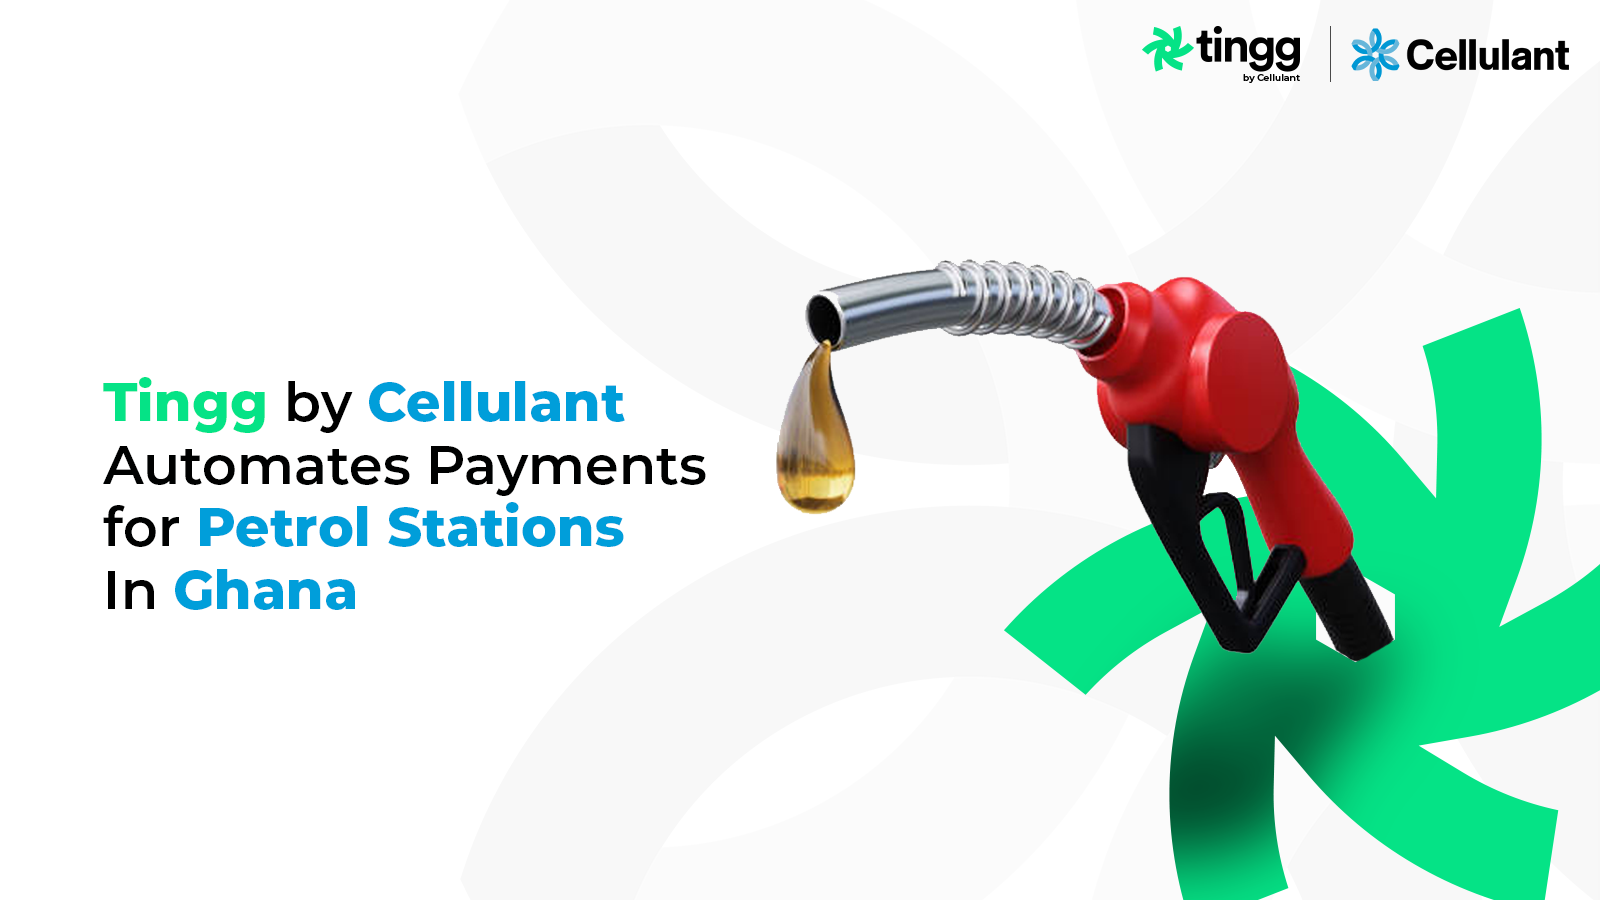 Ghana: Tingg by Cellulant Automates Payments for Petrol Stations in Ghana